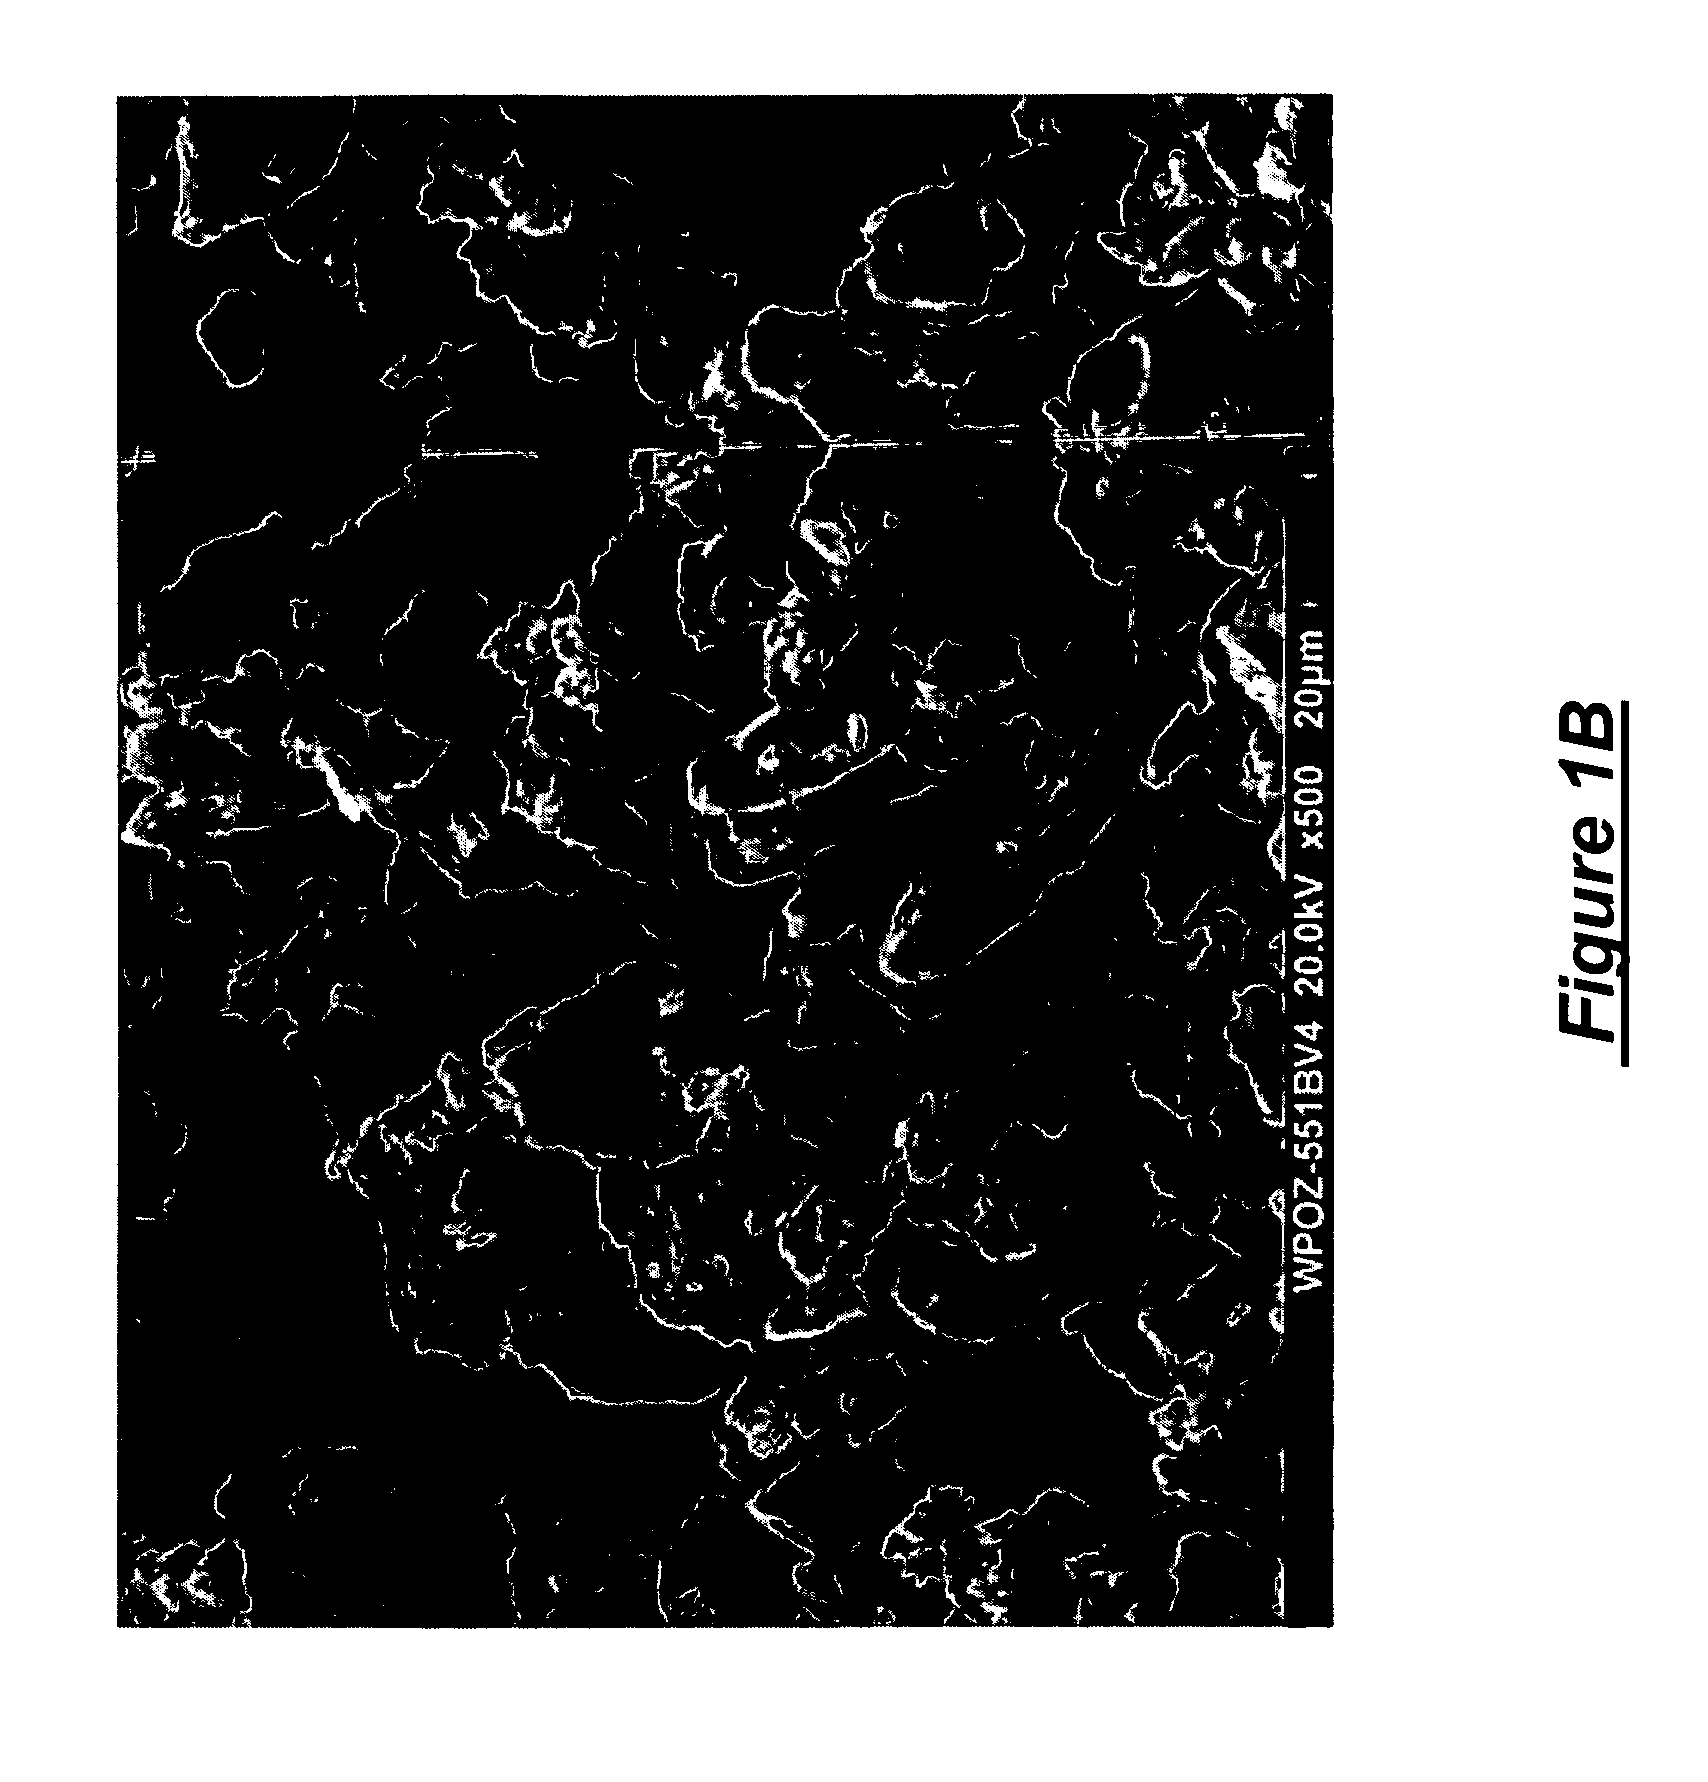 Method for formation of micro-prilled polymers